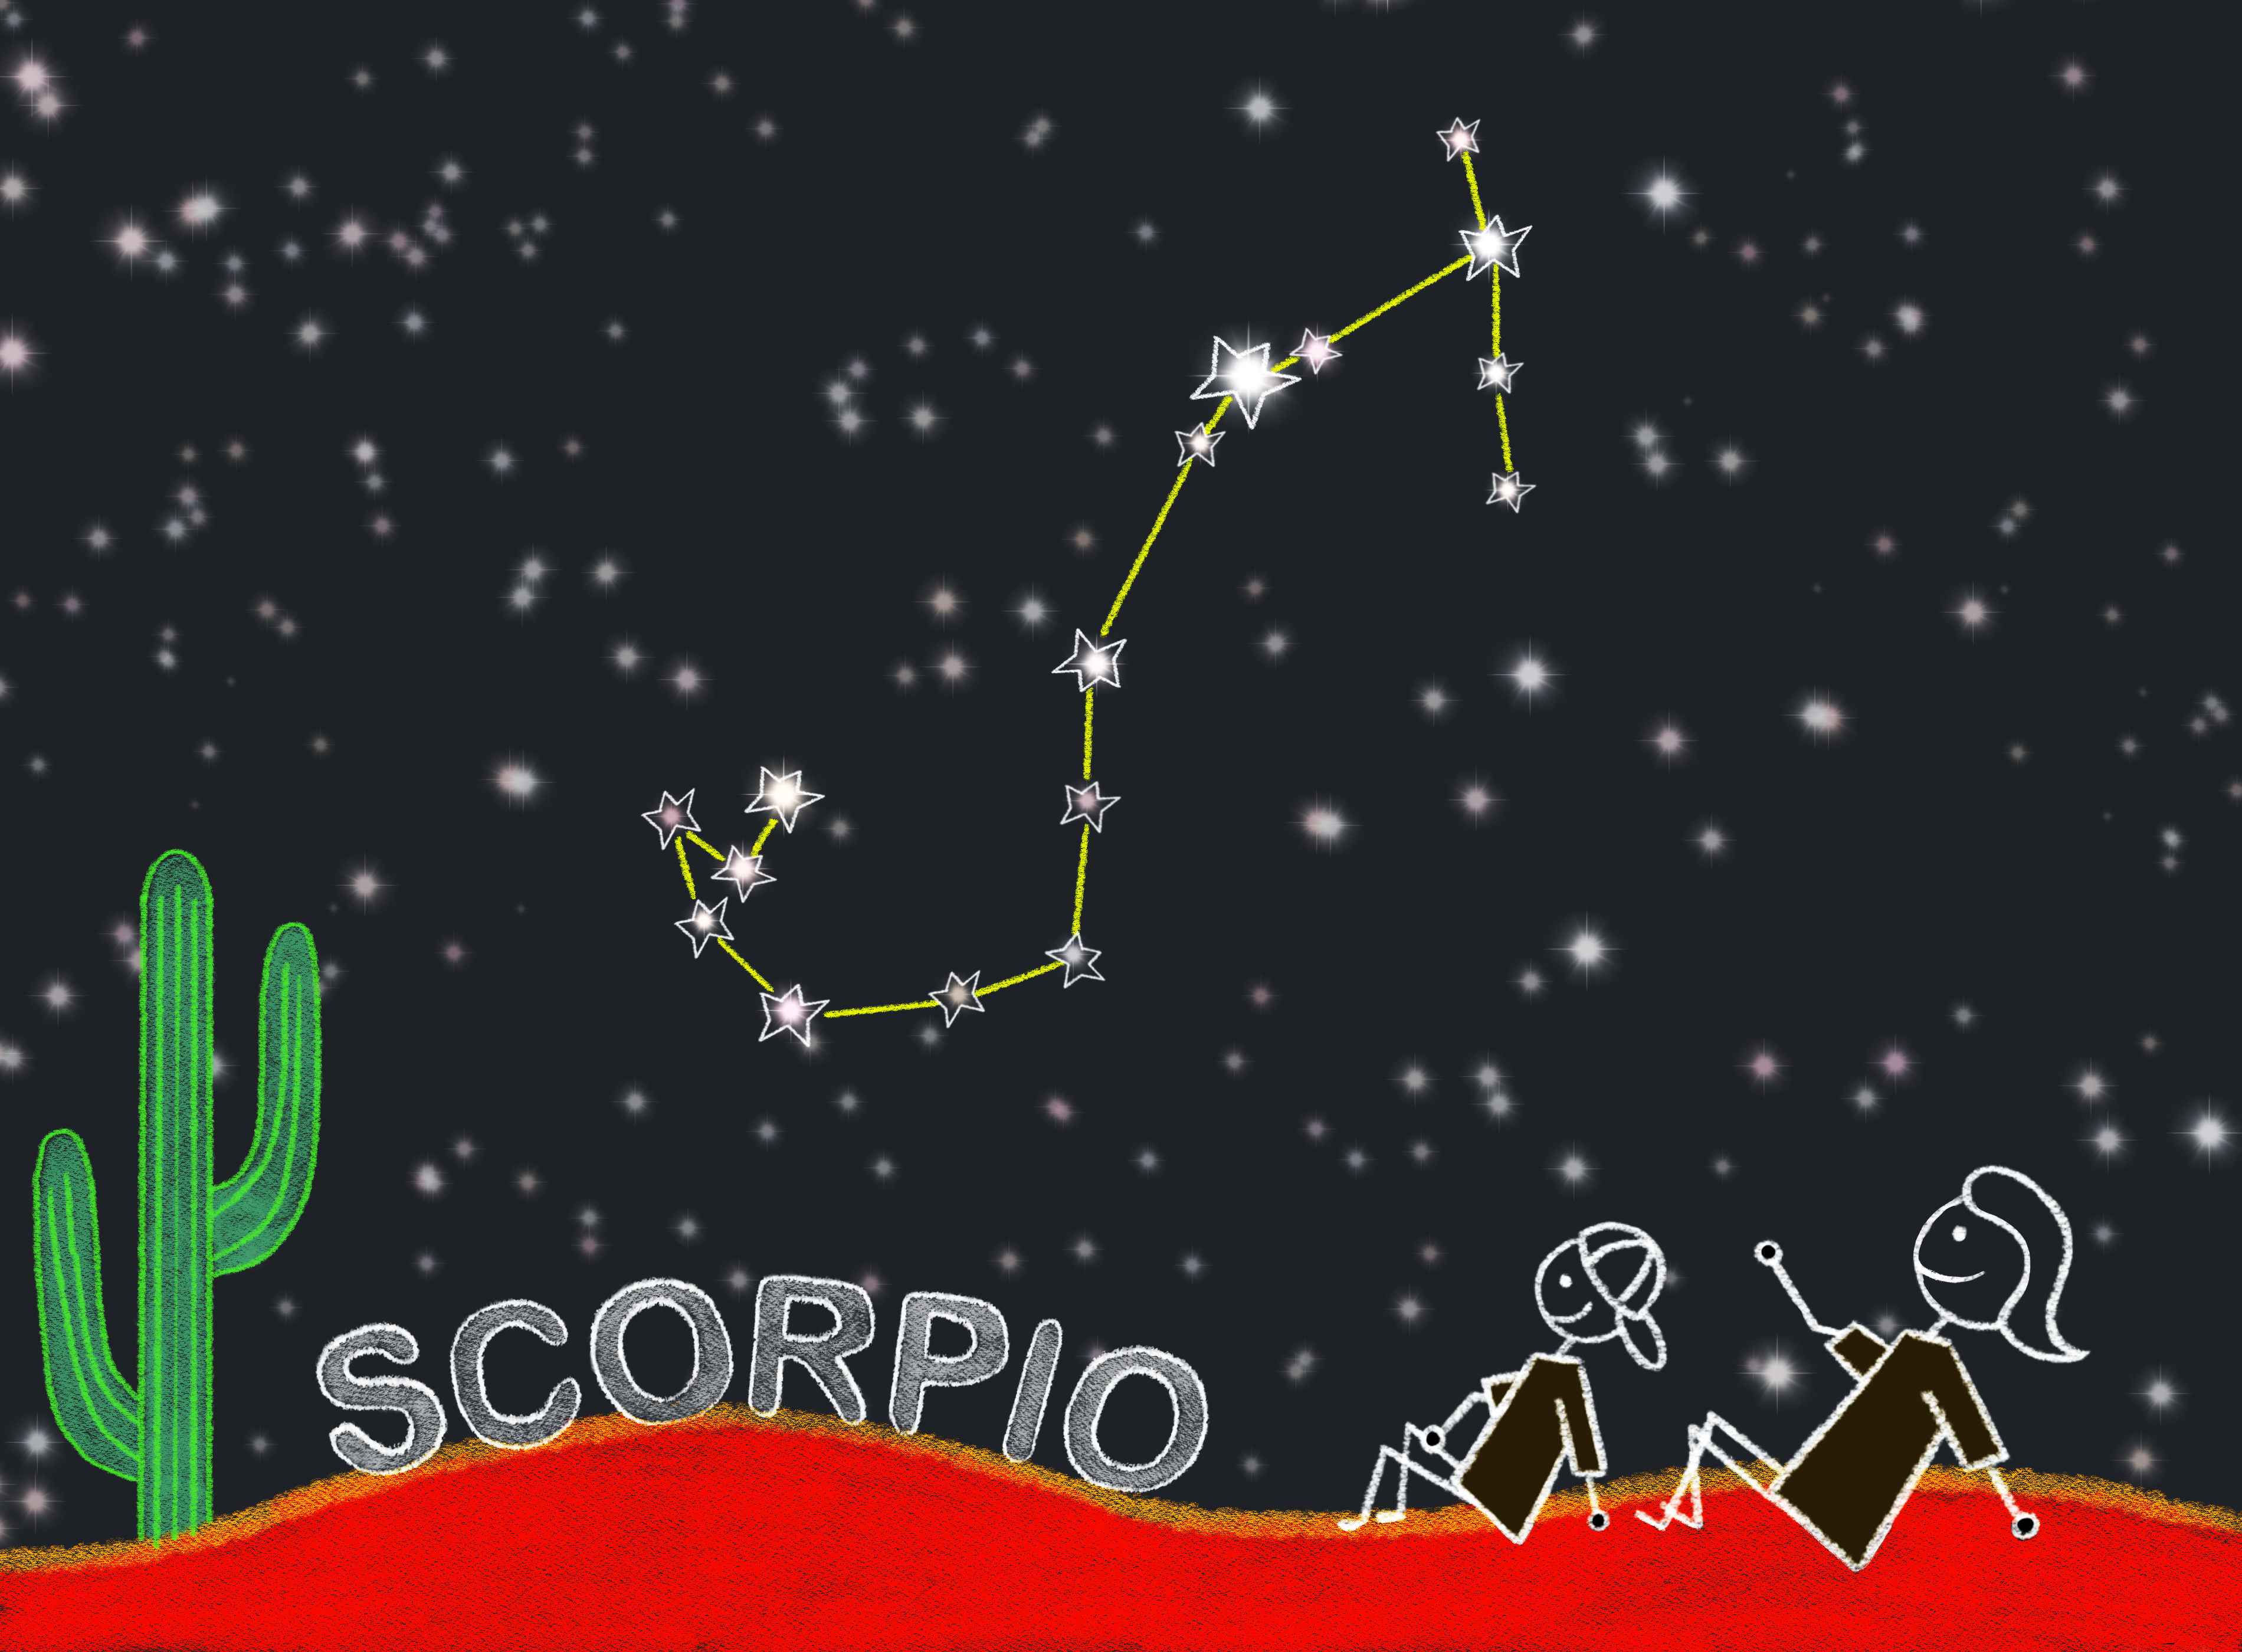 Two stick figures are sitting in the desert looking up at the Scorpio constellation